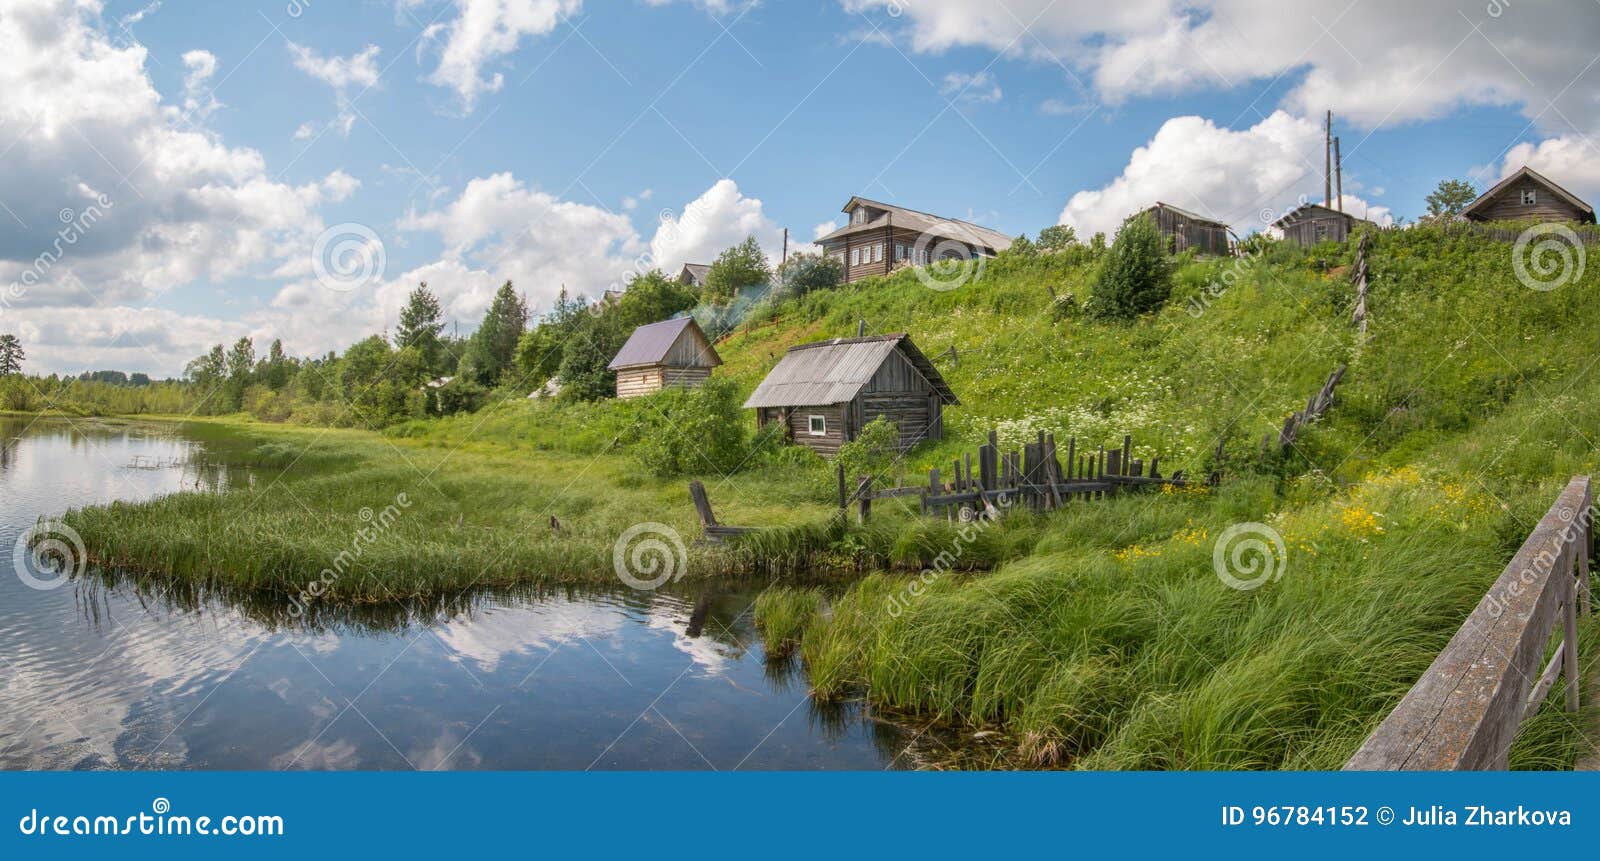 north russian village. summer day, river, old cottages on coast.